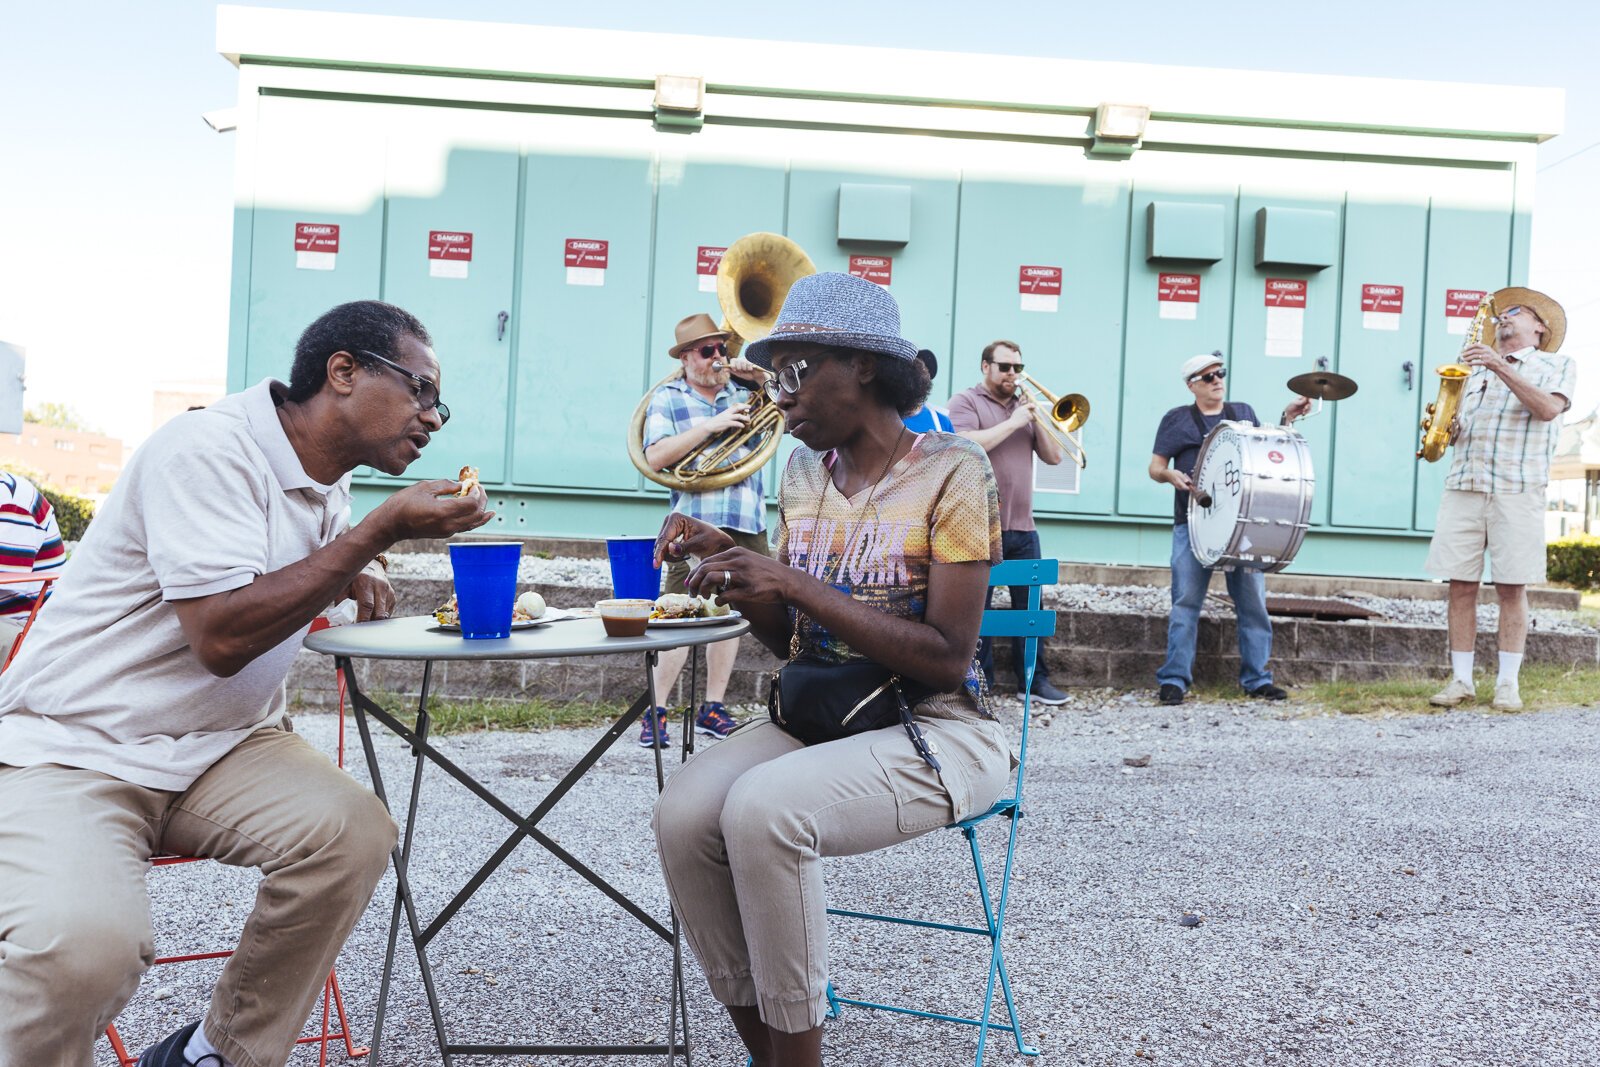 Residents of Madison Heights enjoy food from neighborhood restaurants while the Mighty Souls Brass Band plays an upbeat jazz number. (Ziggy Mack) 